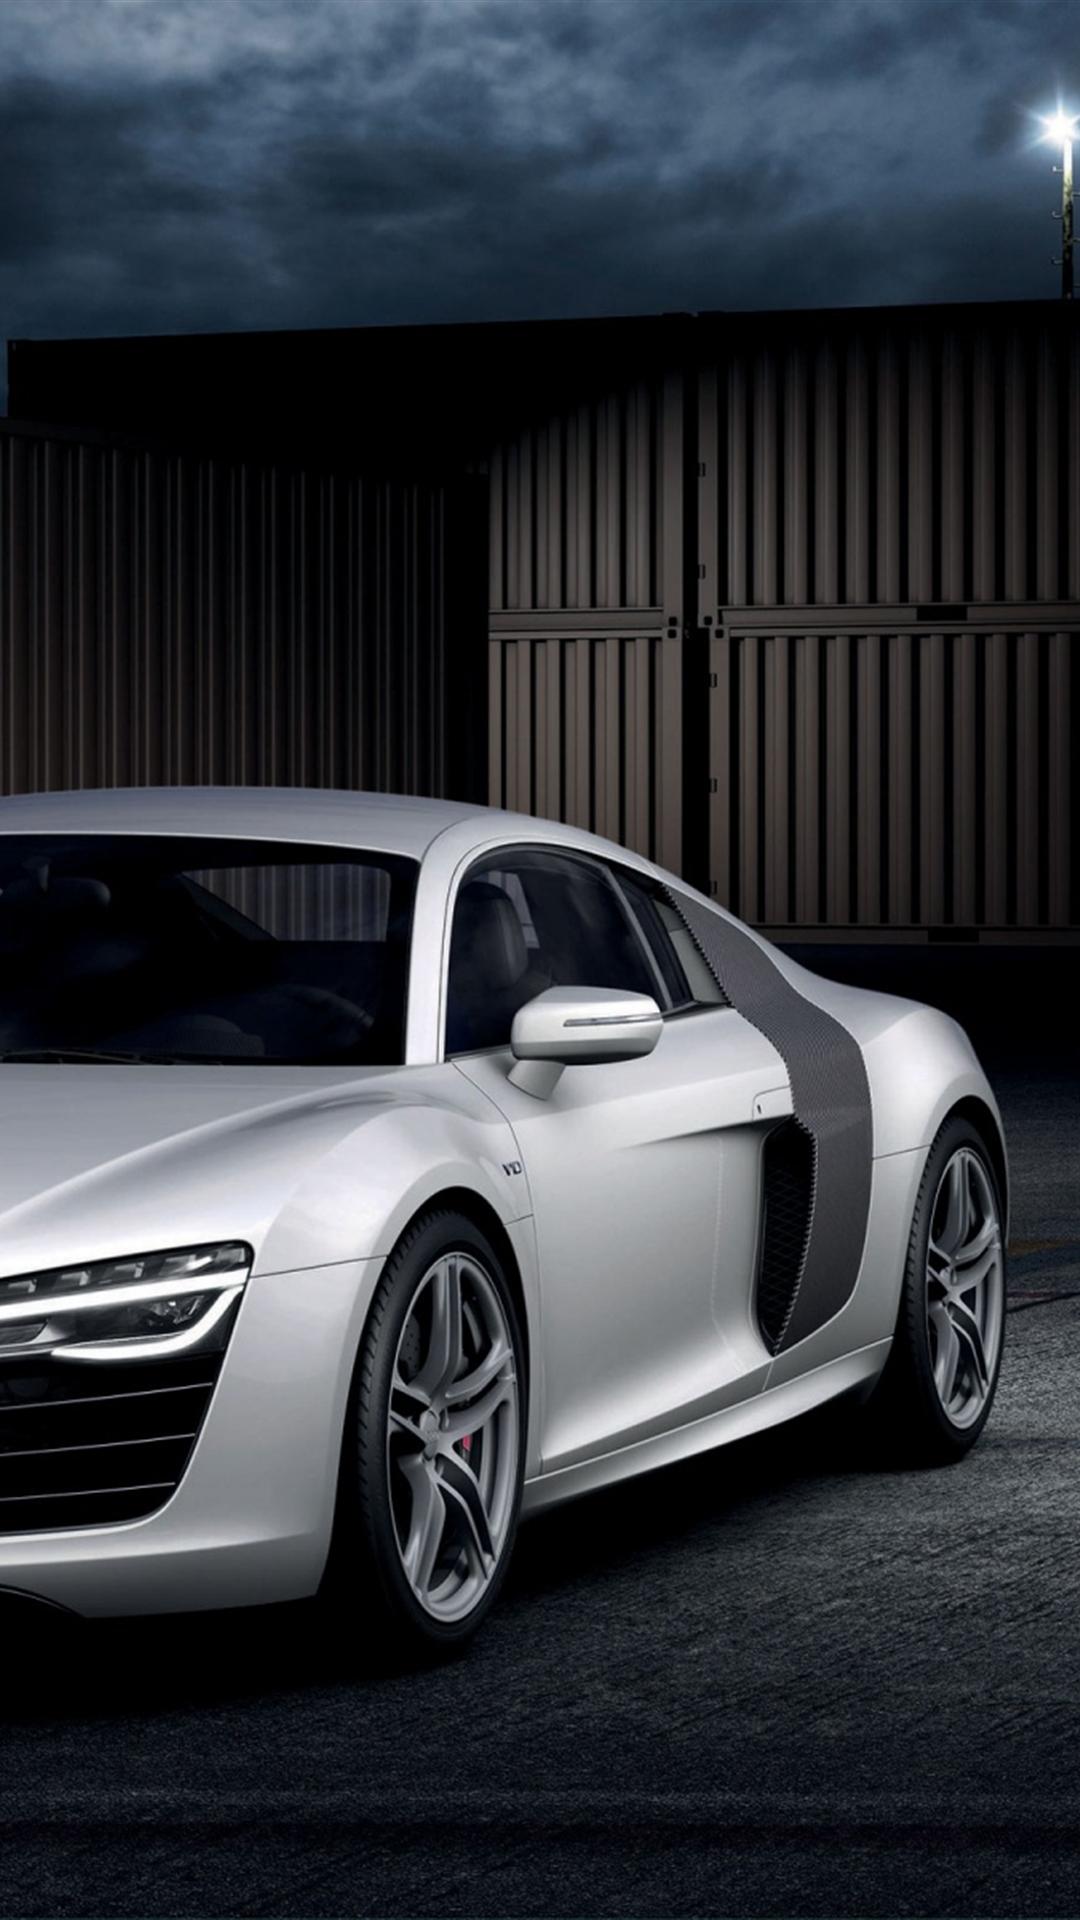 0 Audi R8 Iphone Wallpapers Group Audi R8 Iphone Wallpapers - Audi R8 Wallpaper Hd Iphone , HD Wallpaper & Backgrounds